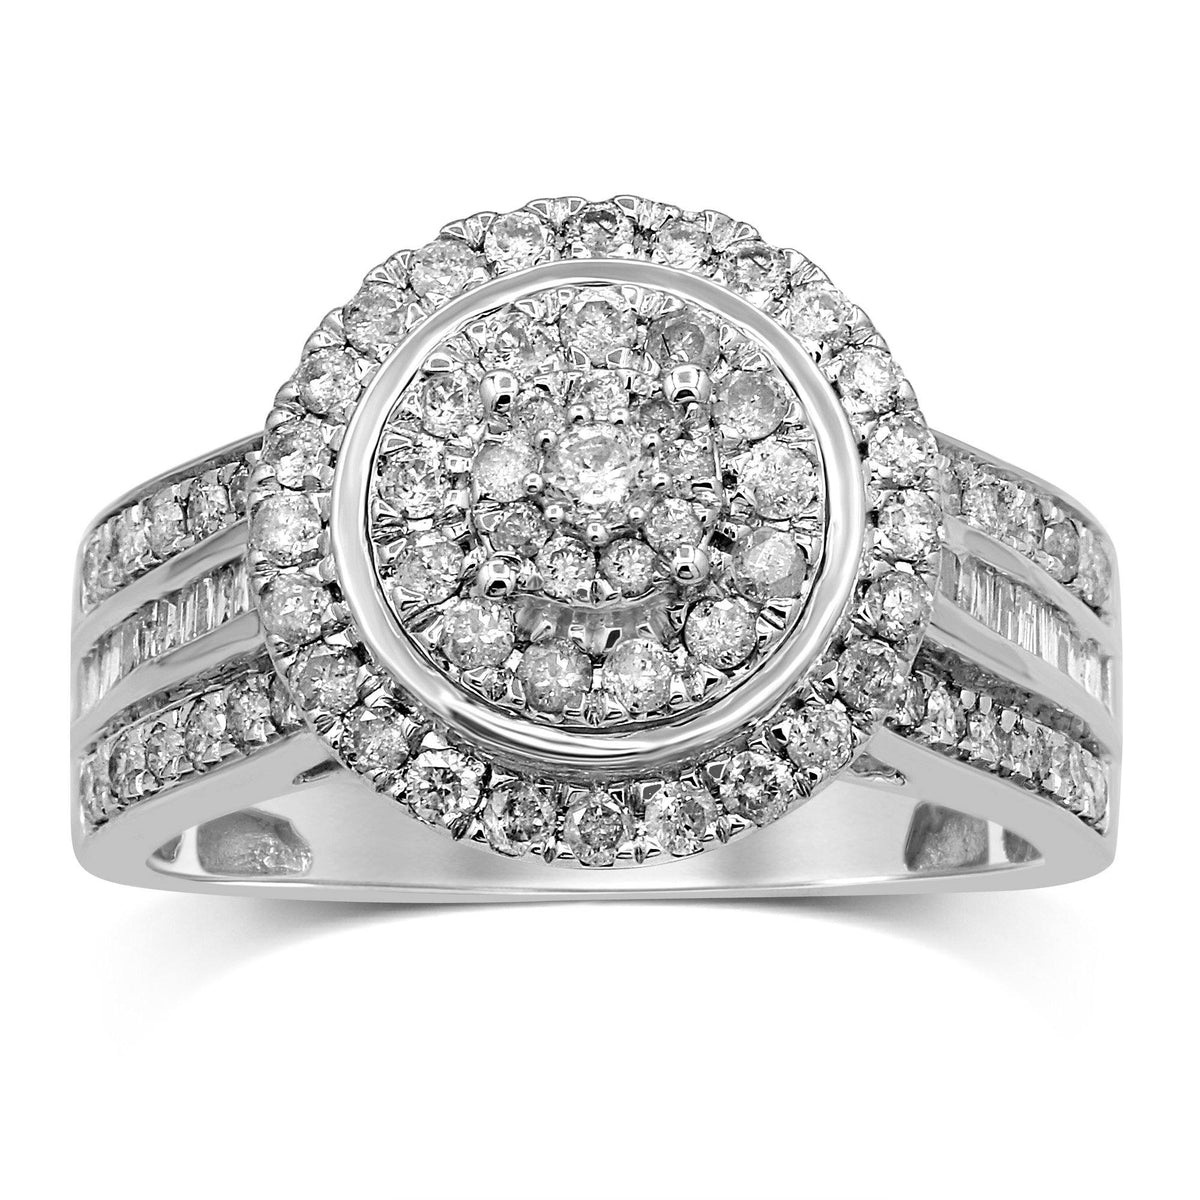 Halo Baguette Ring with 1.00ct of Diamonds in Sterling Silver Rings Bevilles 